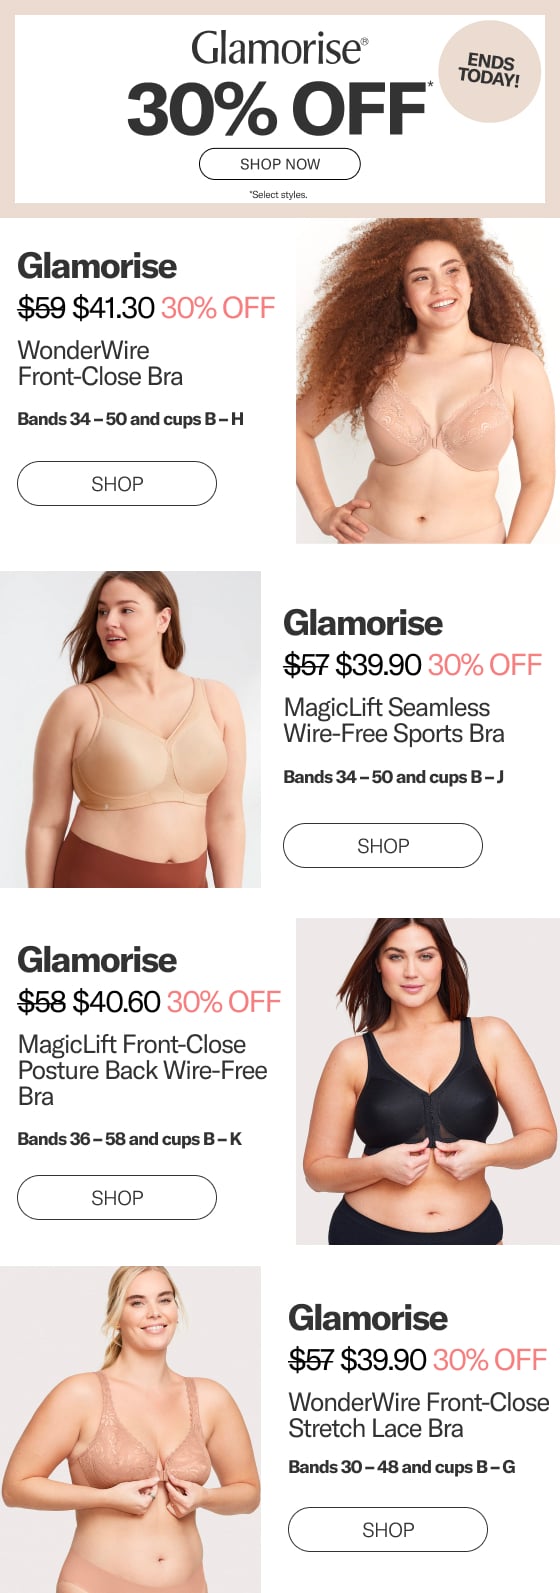 Get Up To 30% Off Glamorise  Ends Today - Bare Necessities